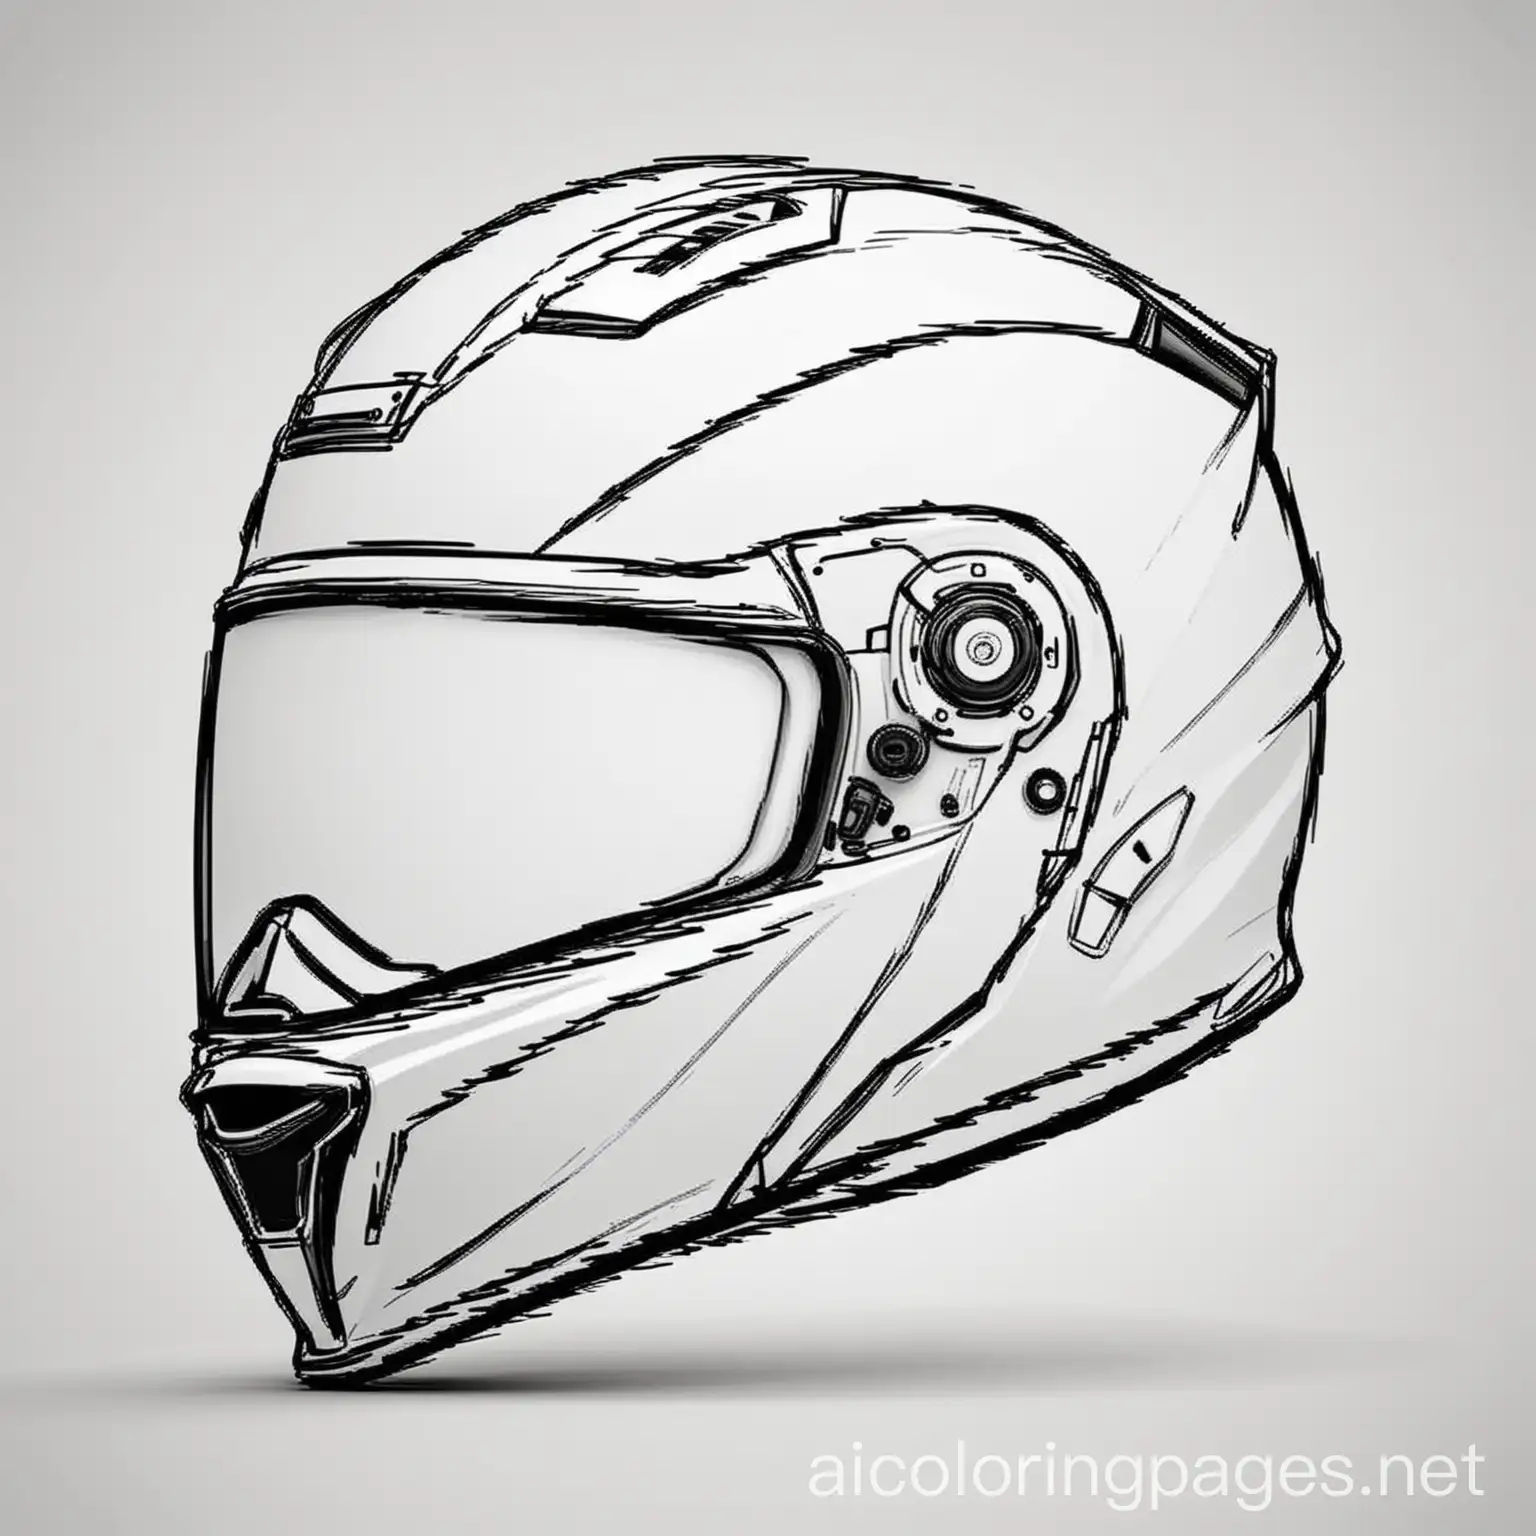 Modular-Motorcycle-Helmet-Coloring-Page-Black-and-White-Line-Art-for-Simplicity-and-Easy-Coloring